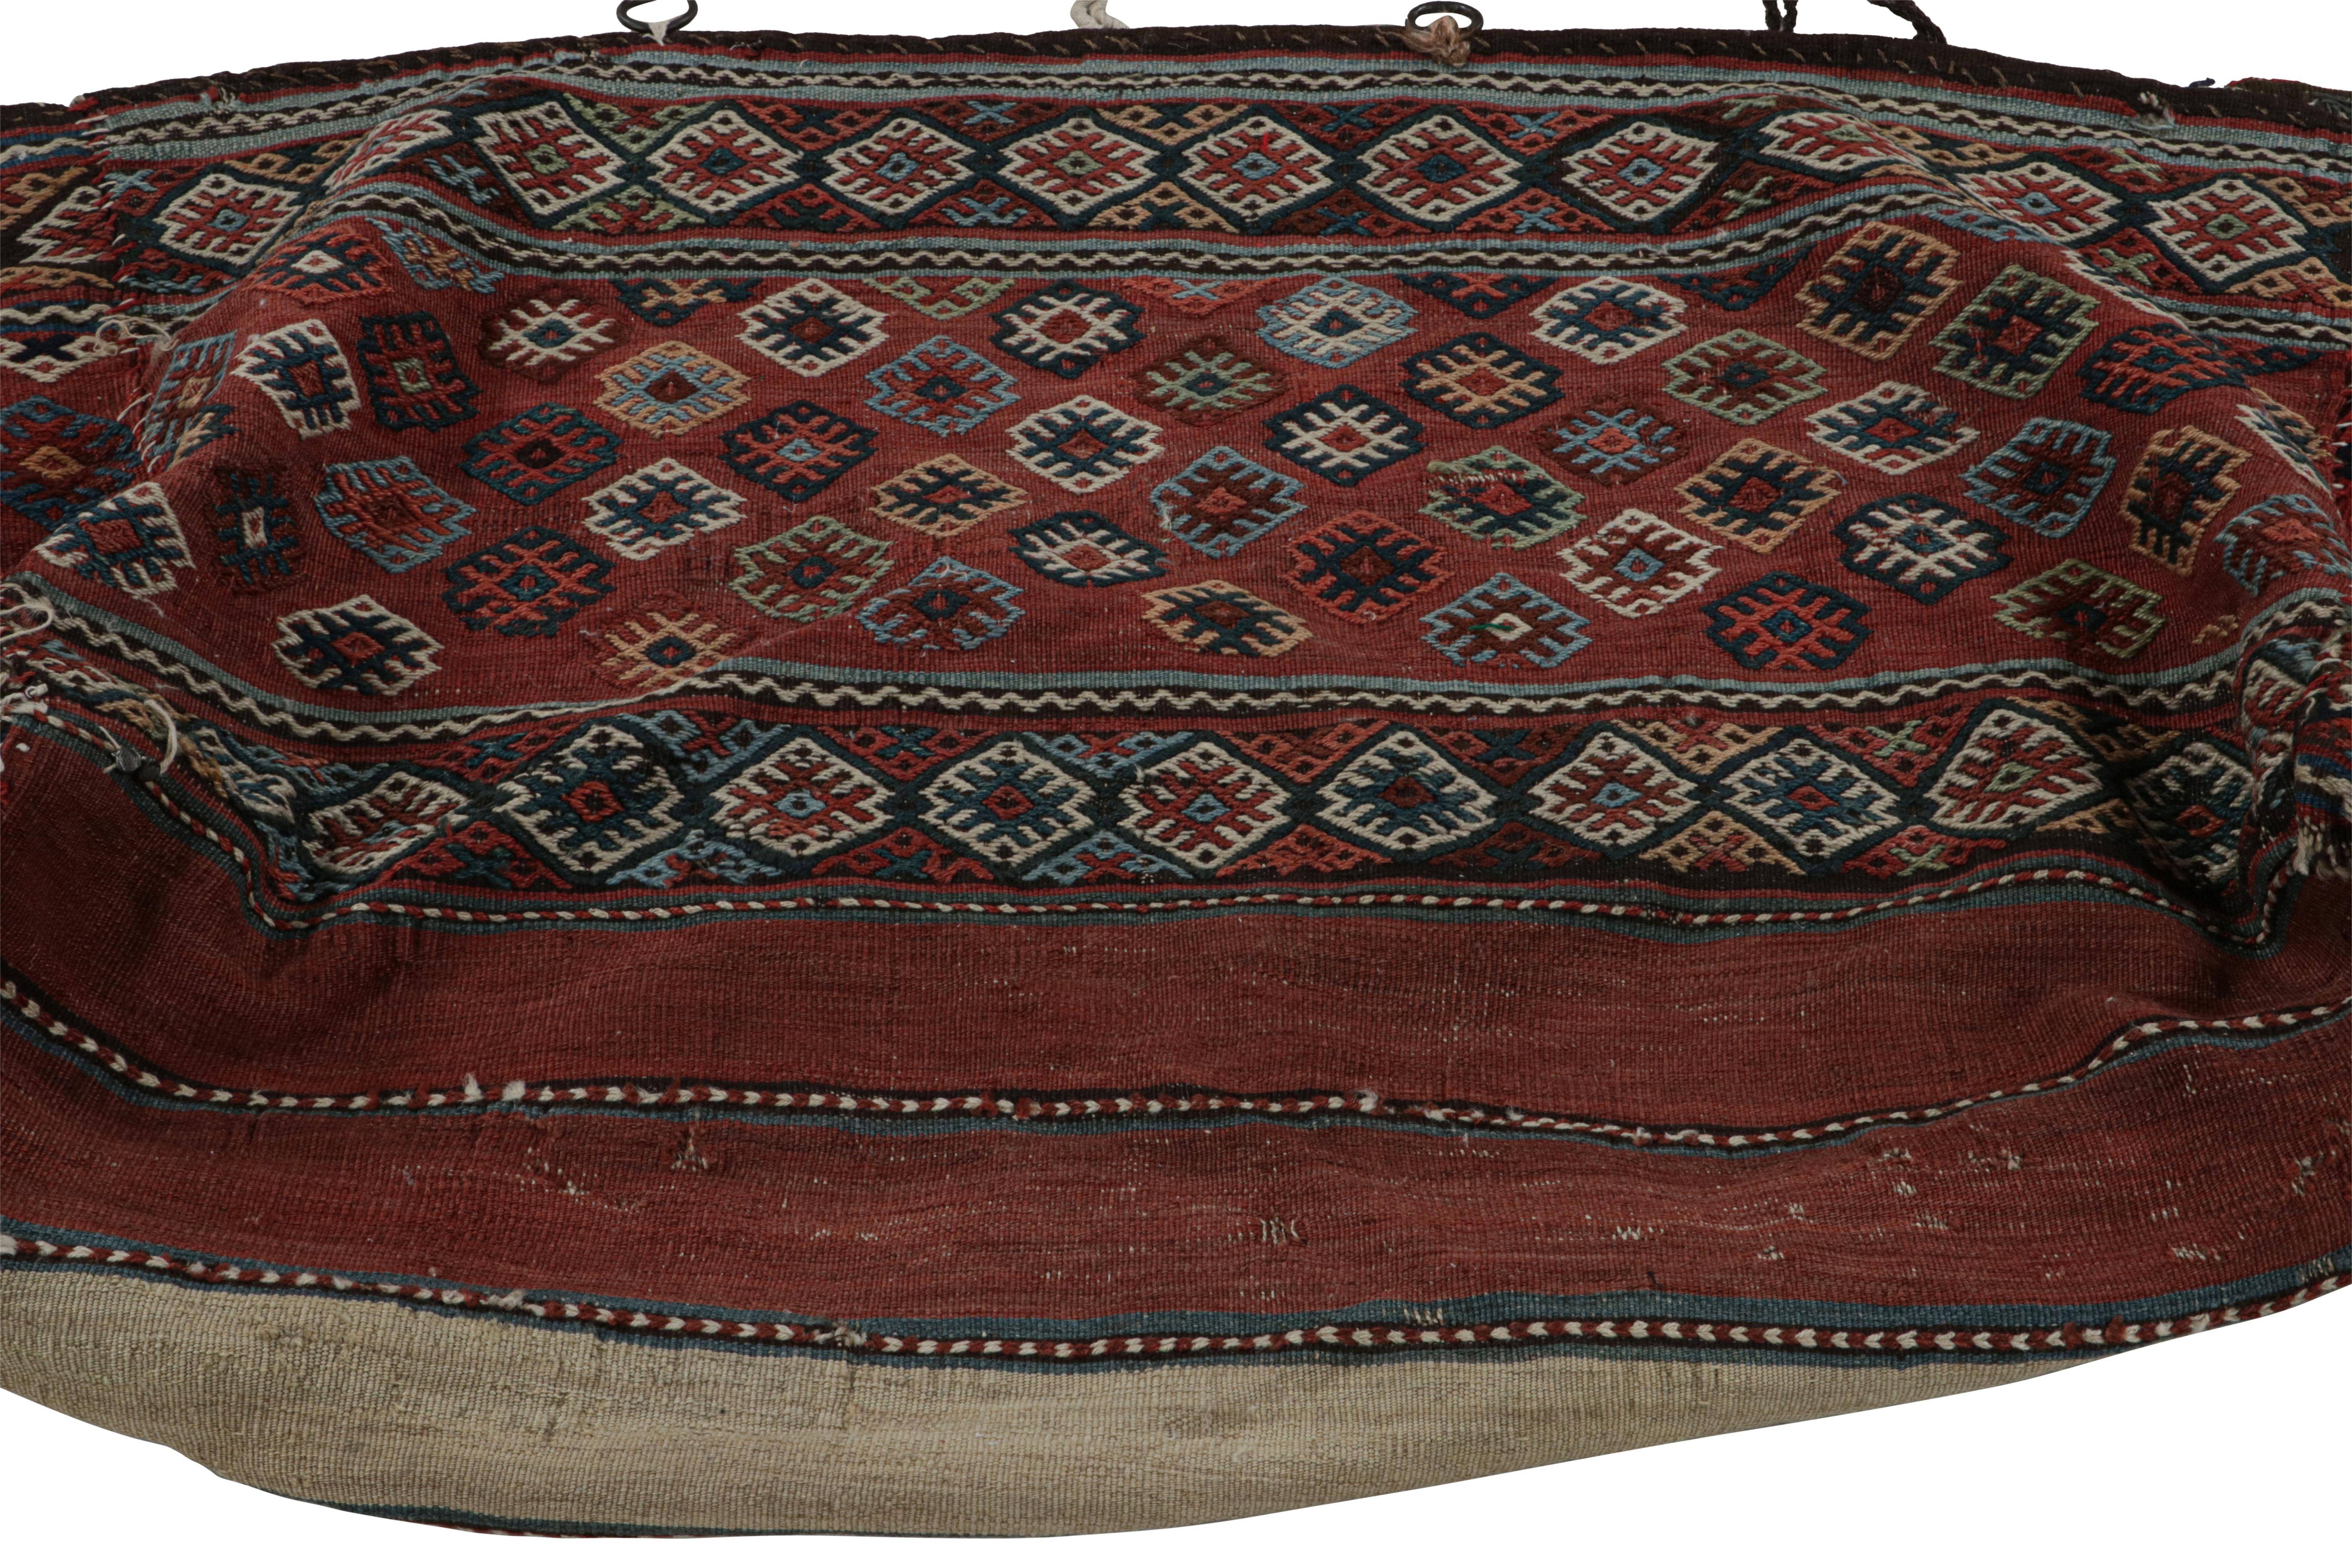 Early 20th Century Antique Turkish Bag Kilim in Red with Geometric Patterns, from Rug & Kilim For Sale